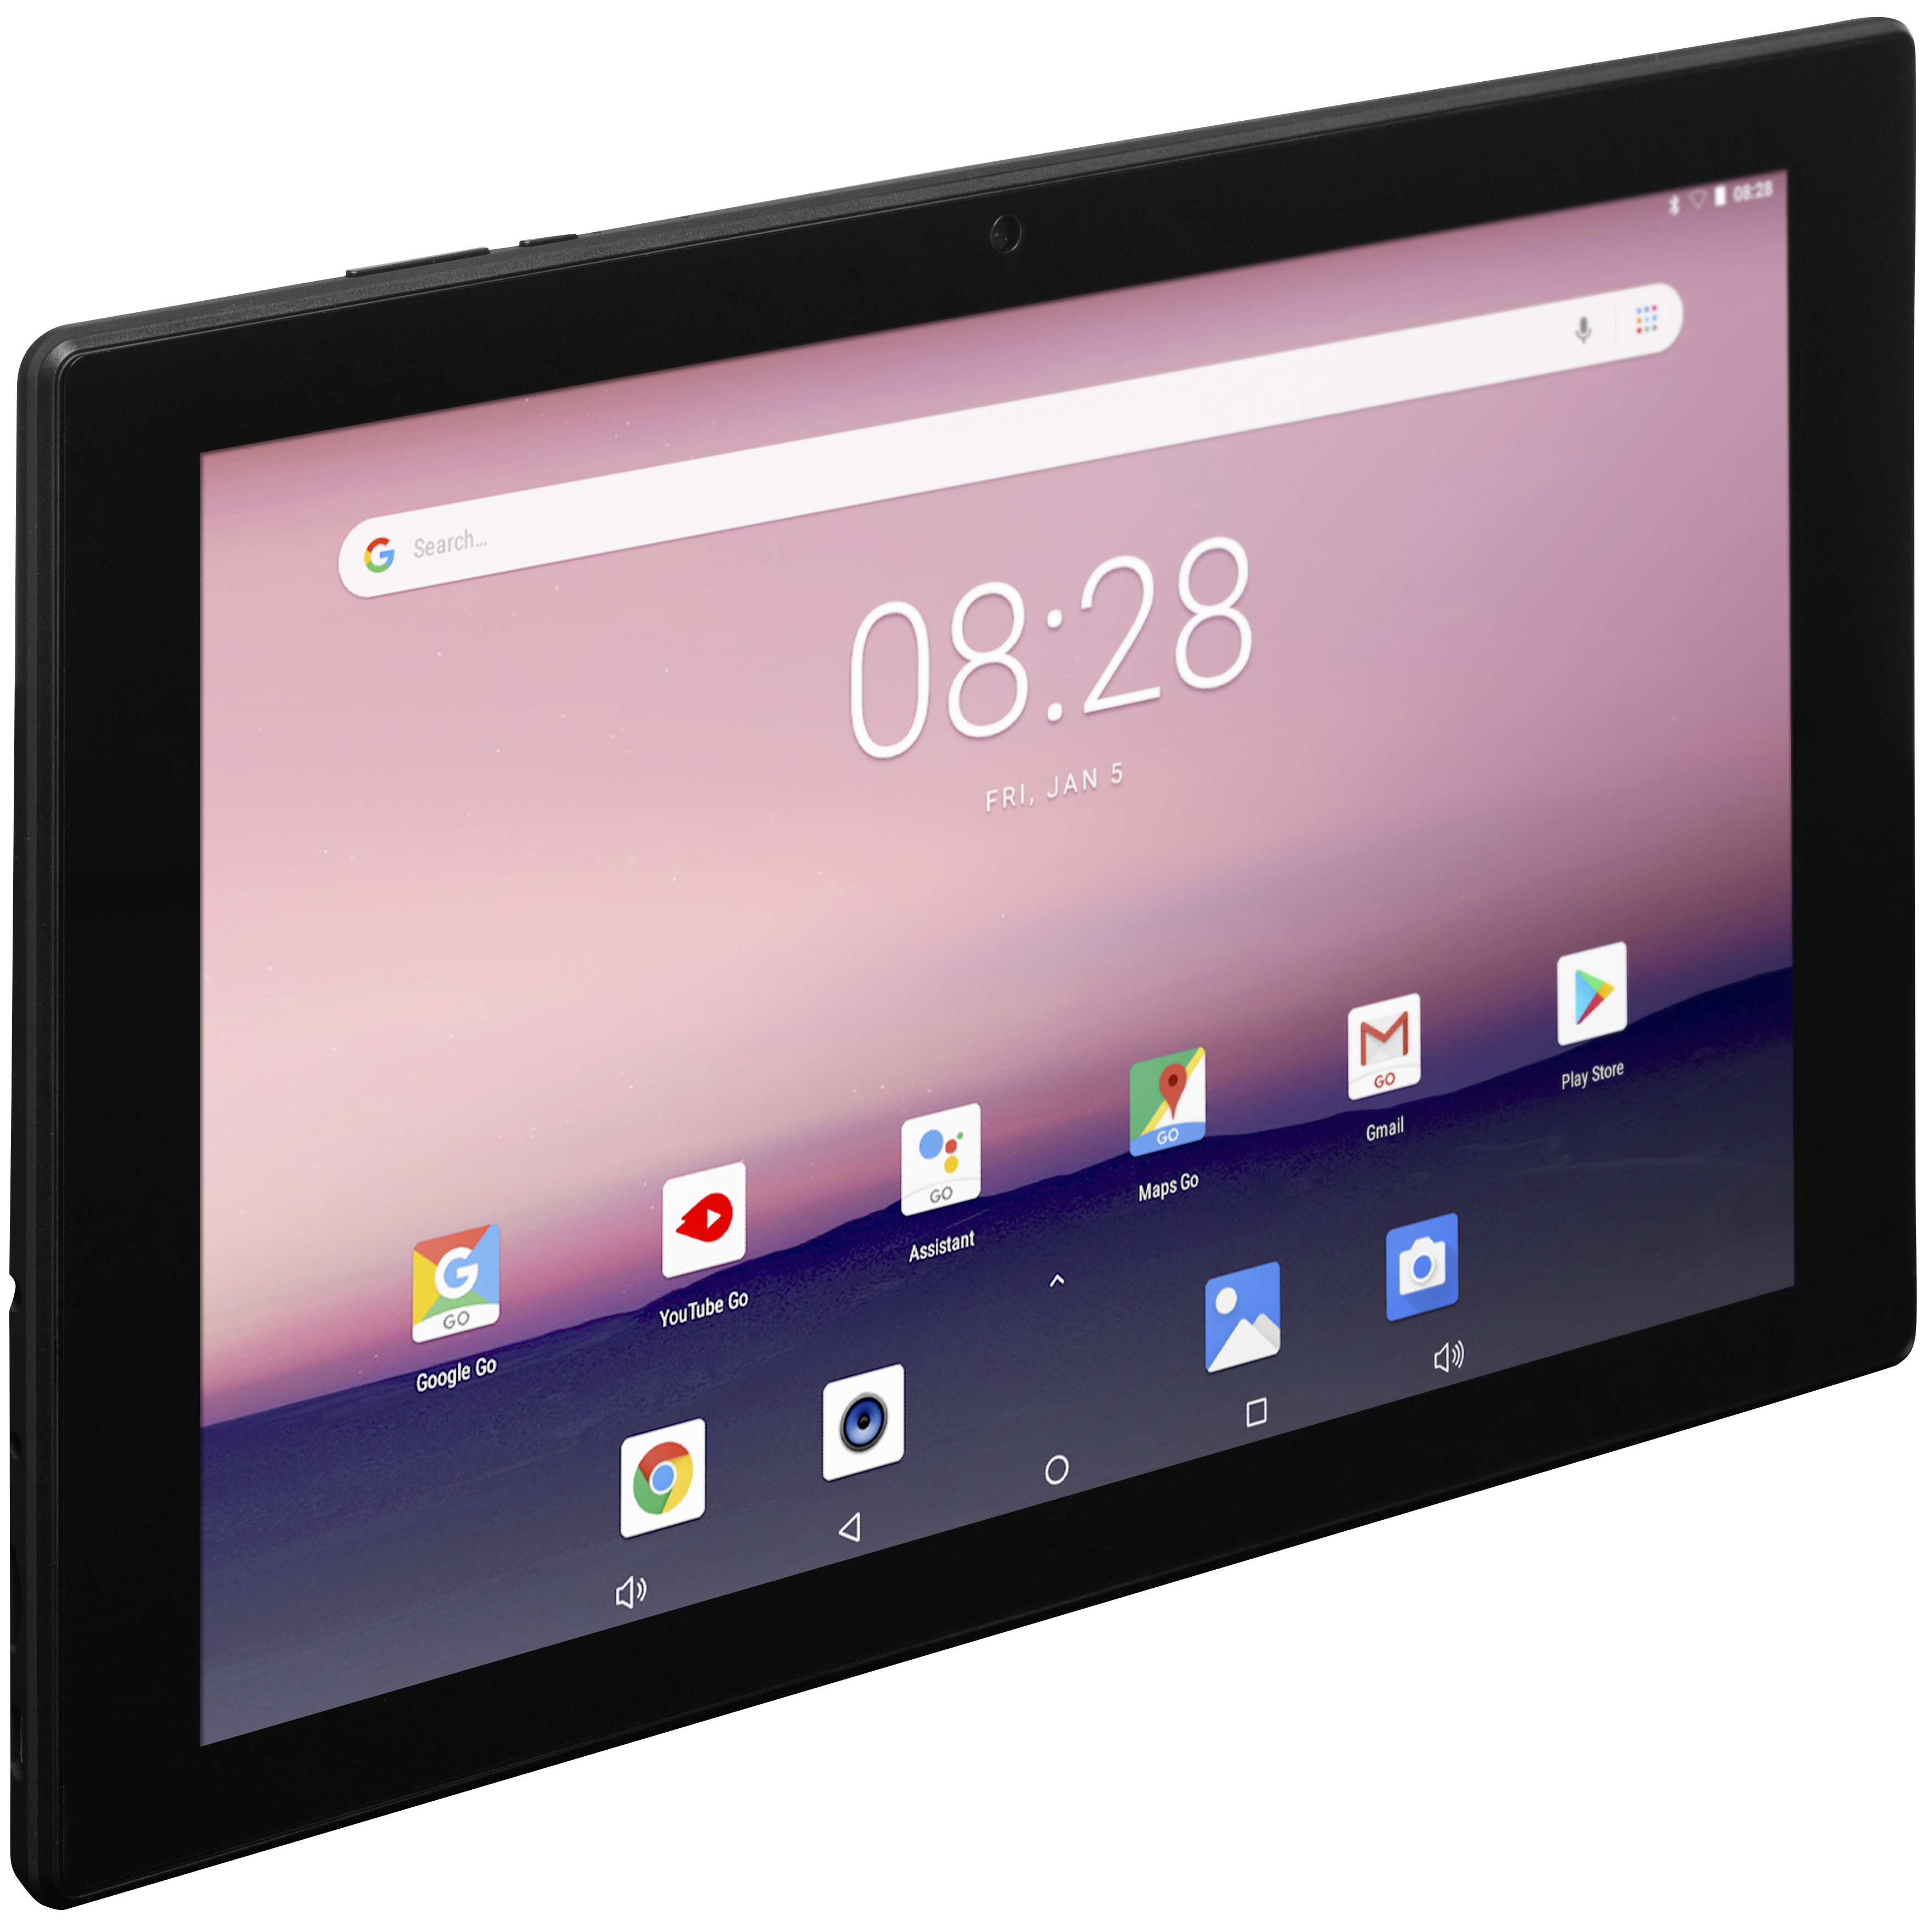 EVOO 11.5" Android Tablet, Quad Core, 32GB Storage, Micro SD Slot, Dual Cameras, Android 8.1 Go Edition, Black - image 2 of 4